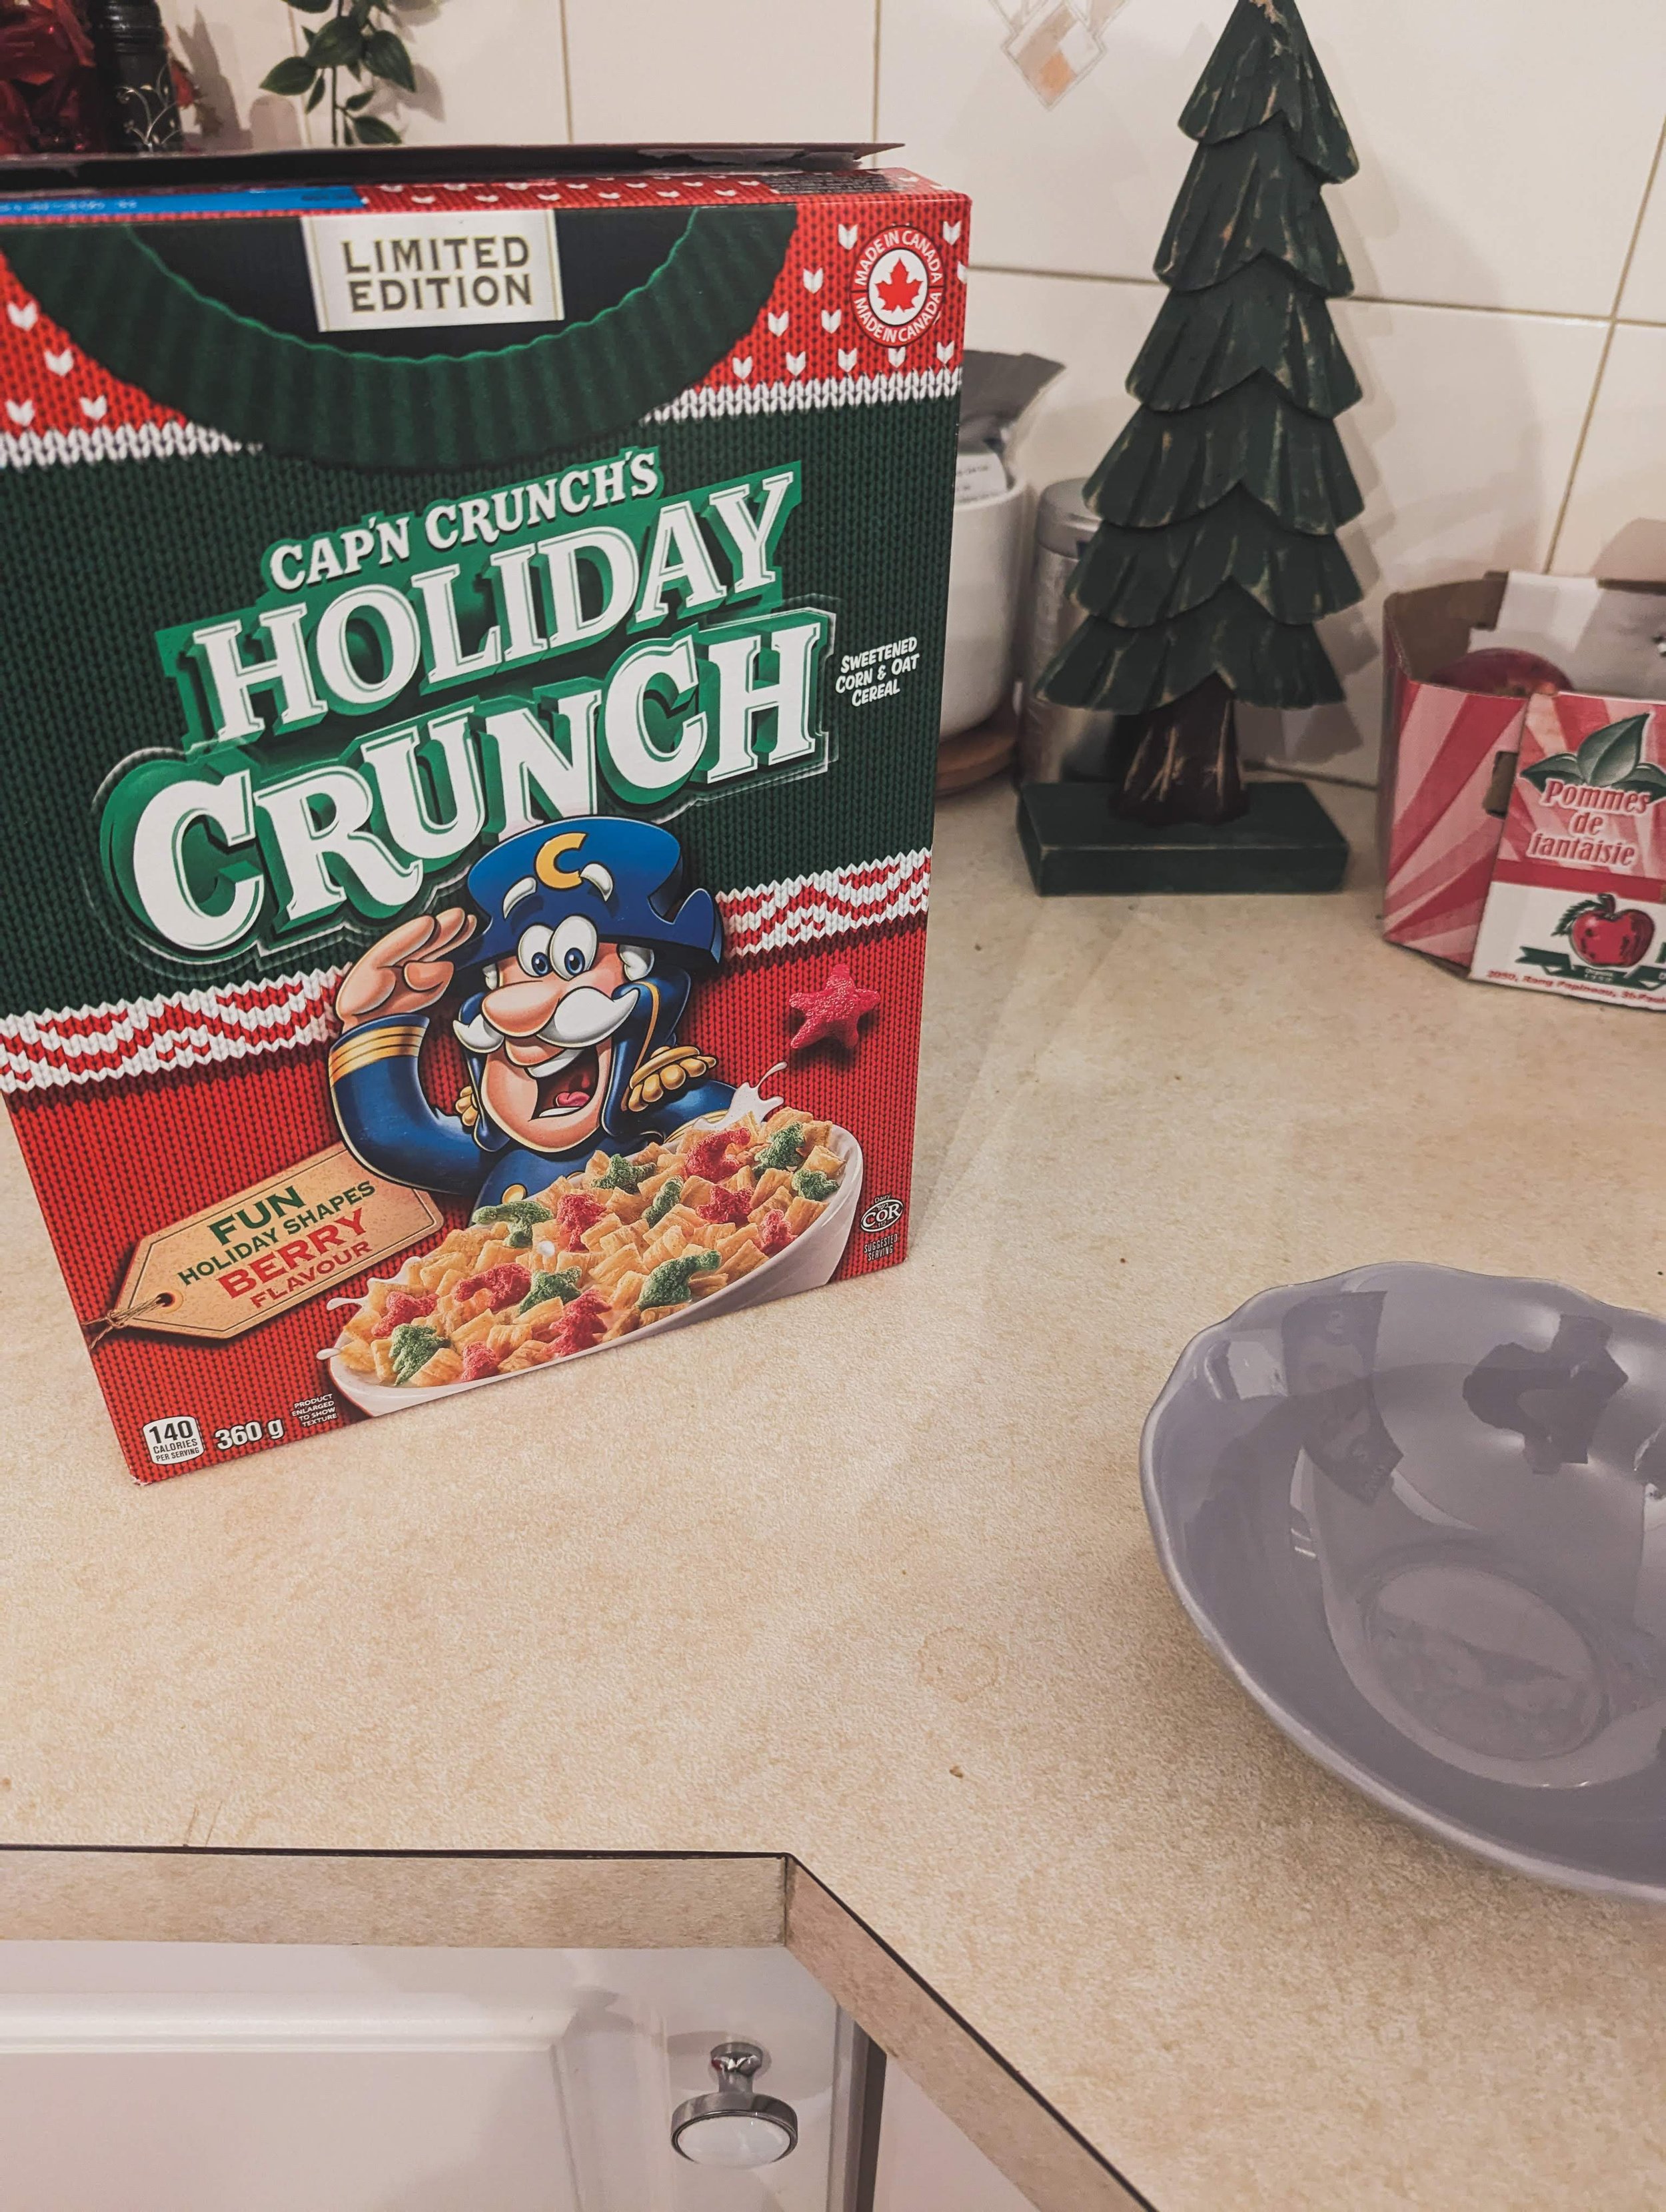  I am a sucker for a holiday themed cereal. 